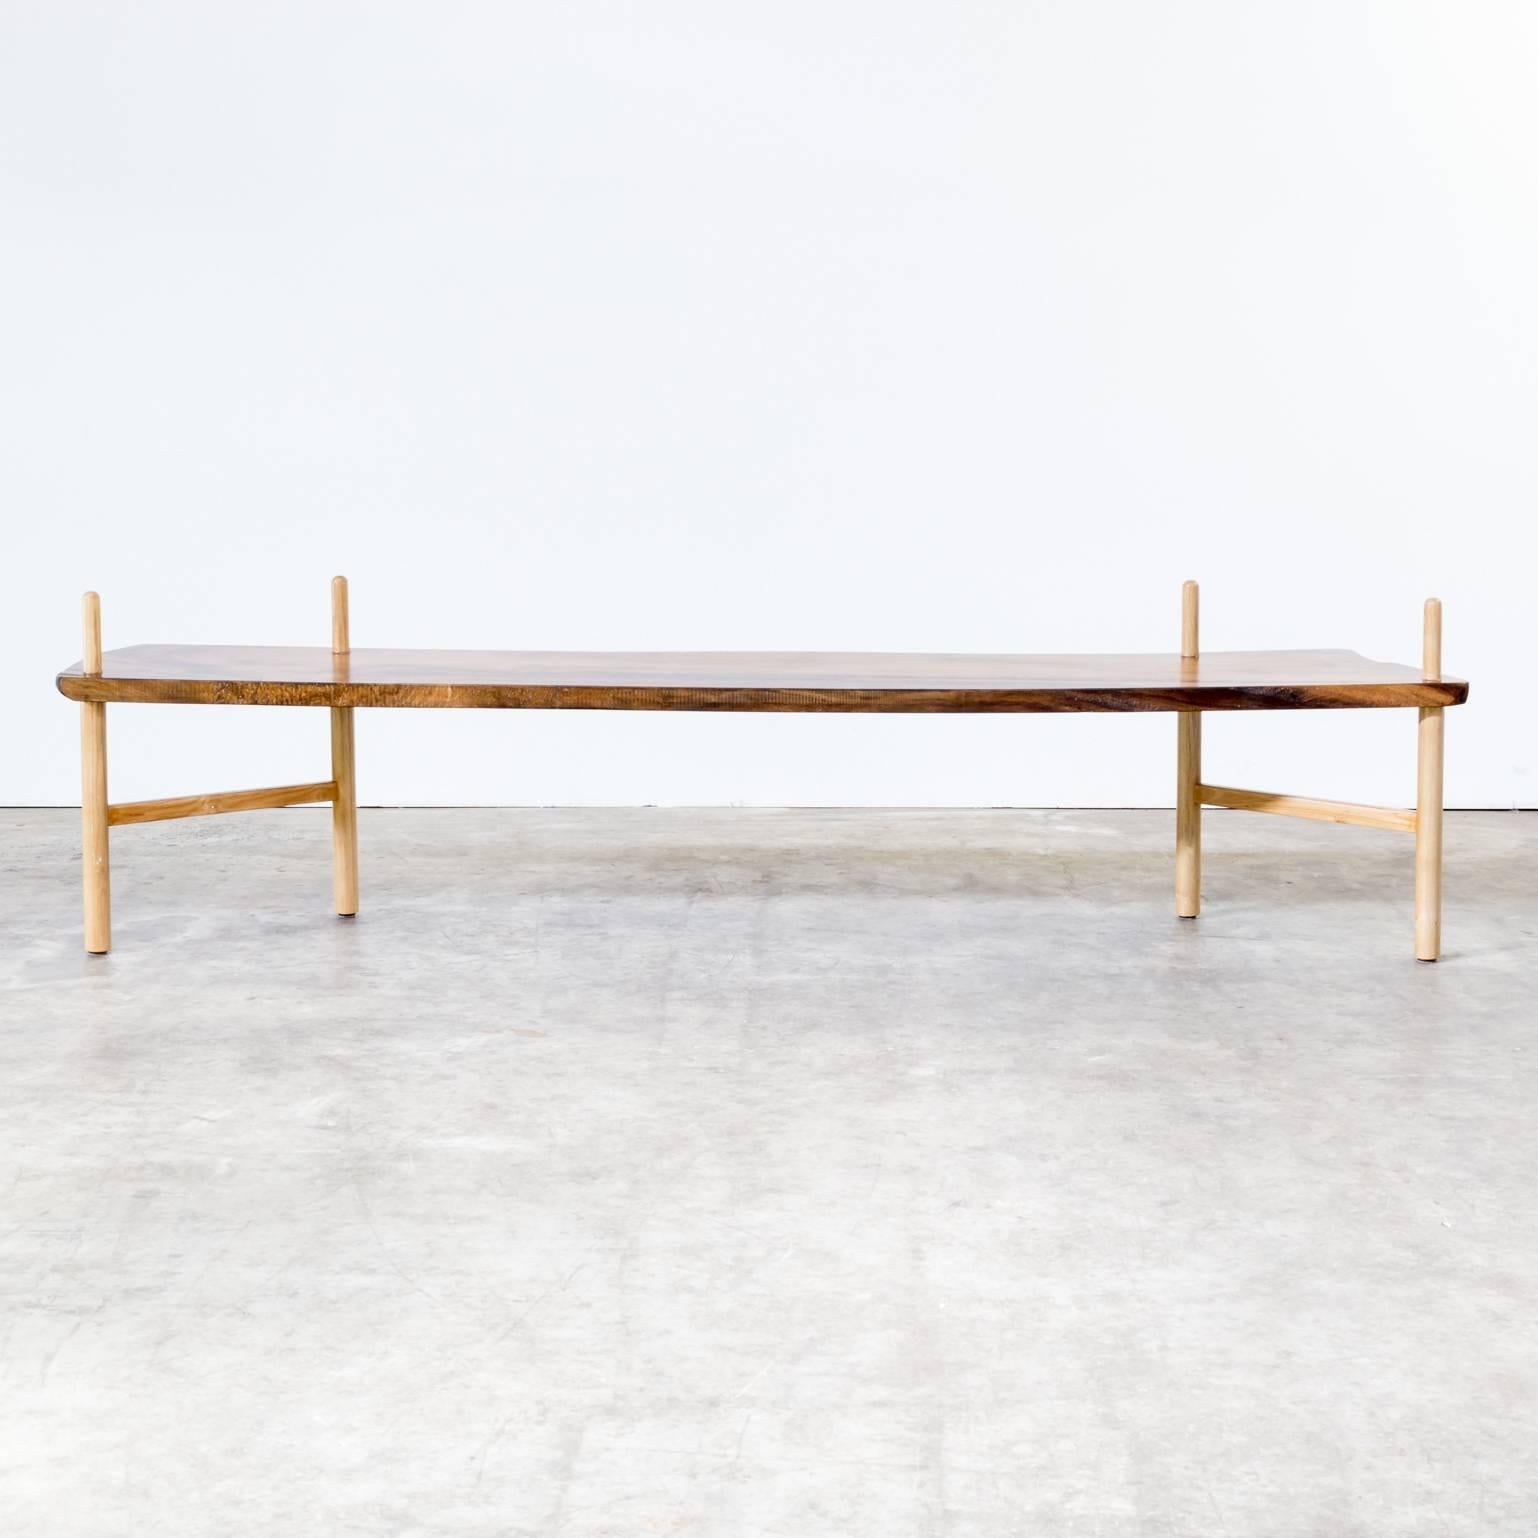 Beautiful walnut bench in the style of George Nakashima. Very good and firm condition. Dimensions: 222cm (W) x 39cm (D) x 60cm (H) seat h 45.5cm.